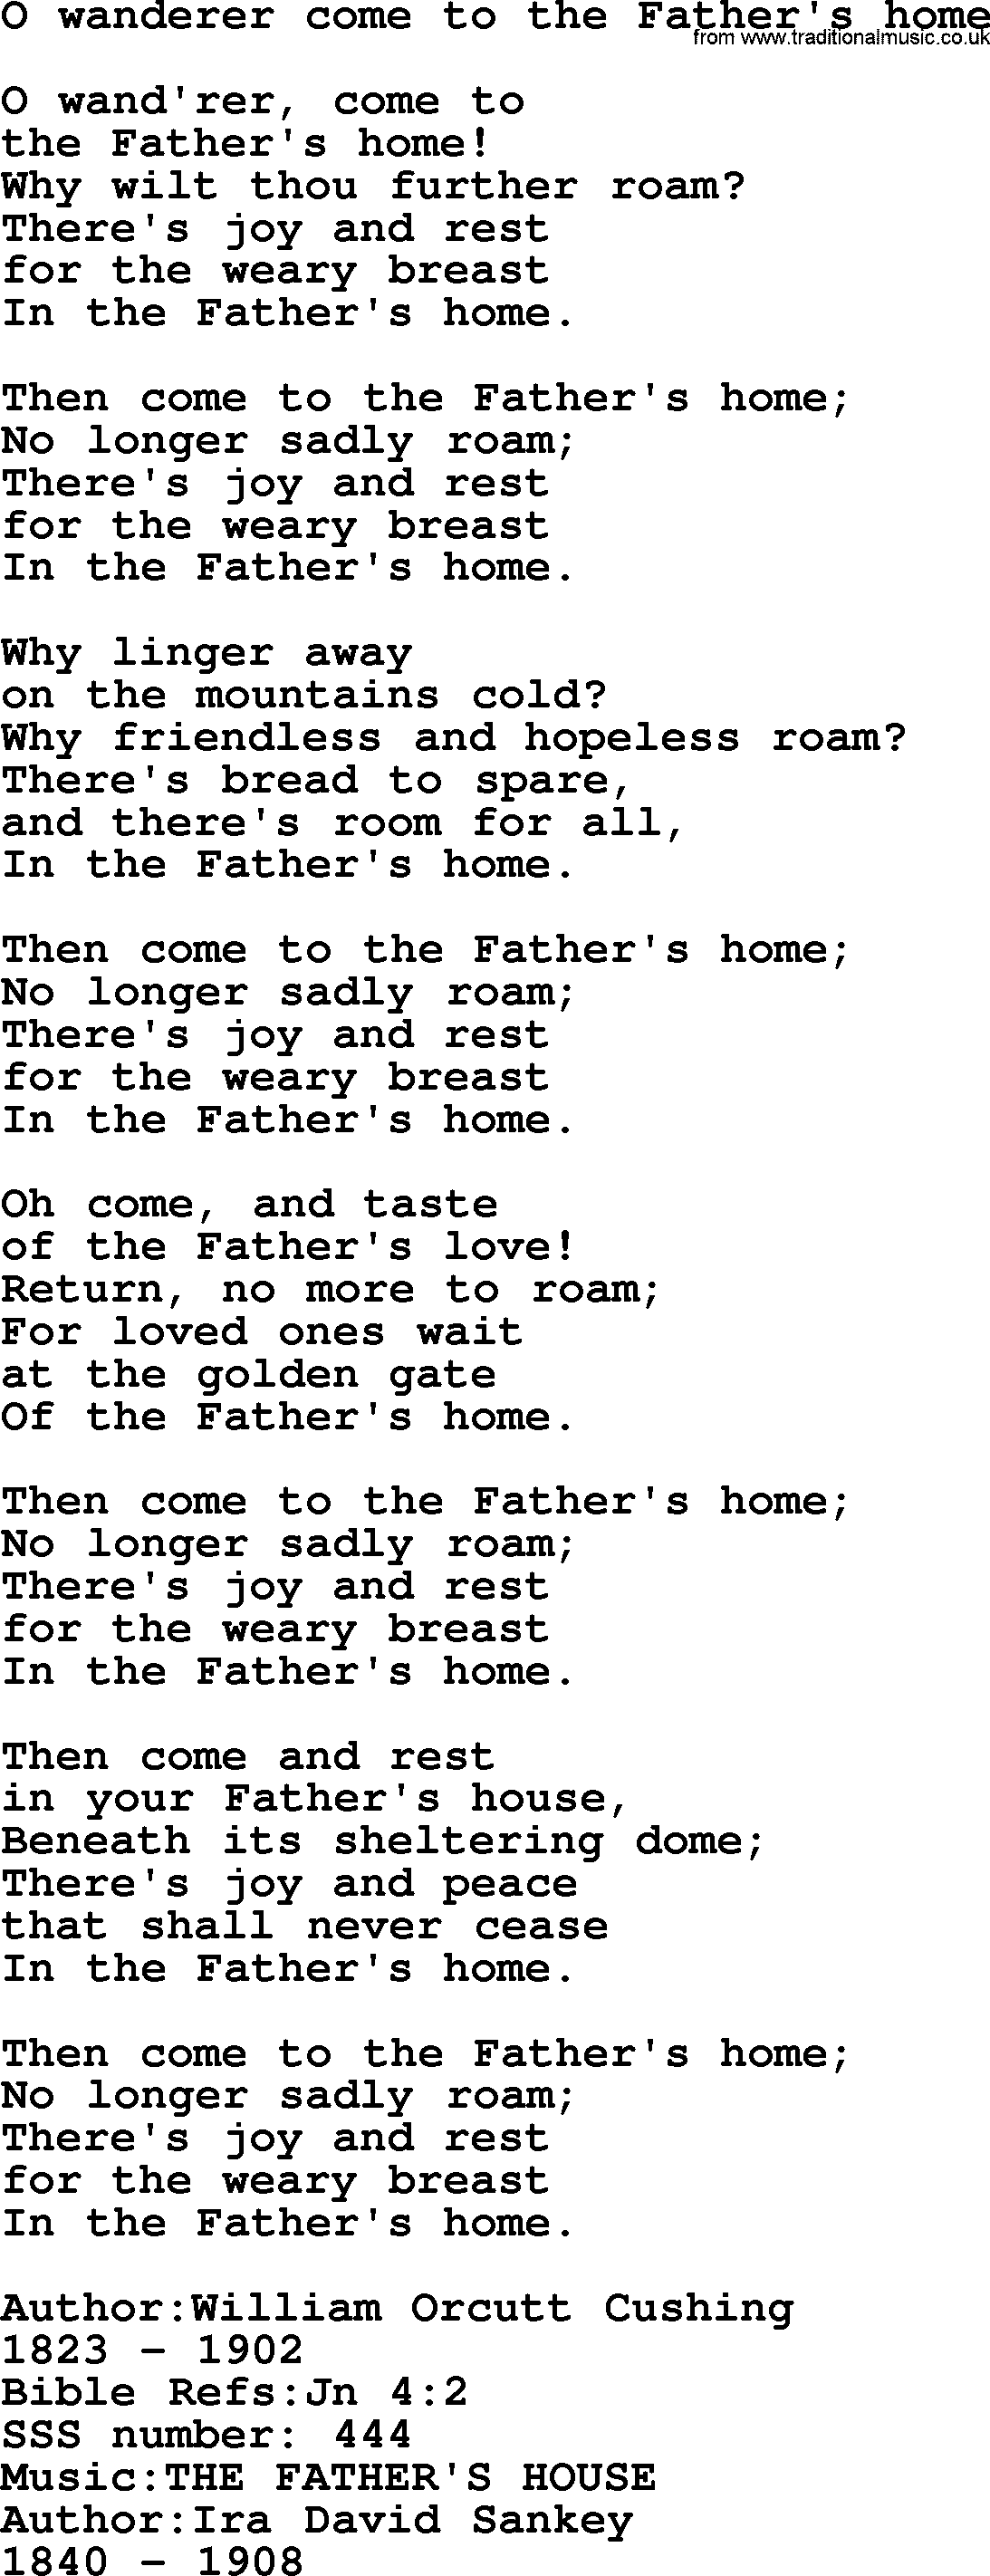 Sacred Songs and Solos complete, 1200 Hymns, title: O Wanderer Come To The Father's Home, lyrics and PDF